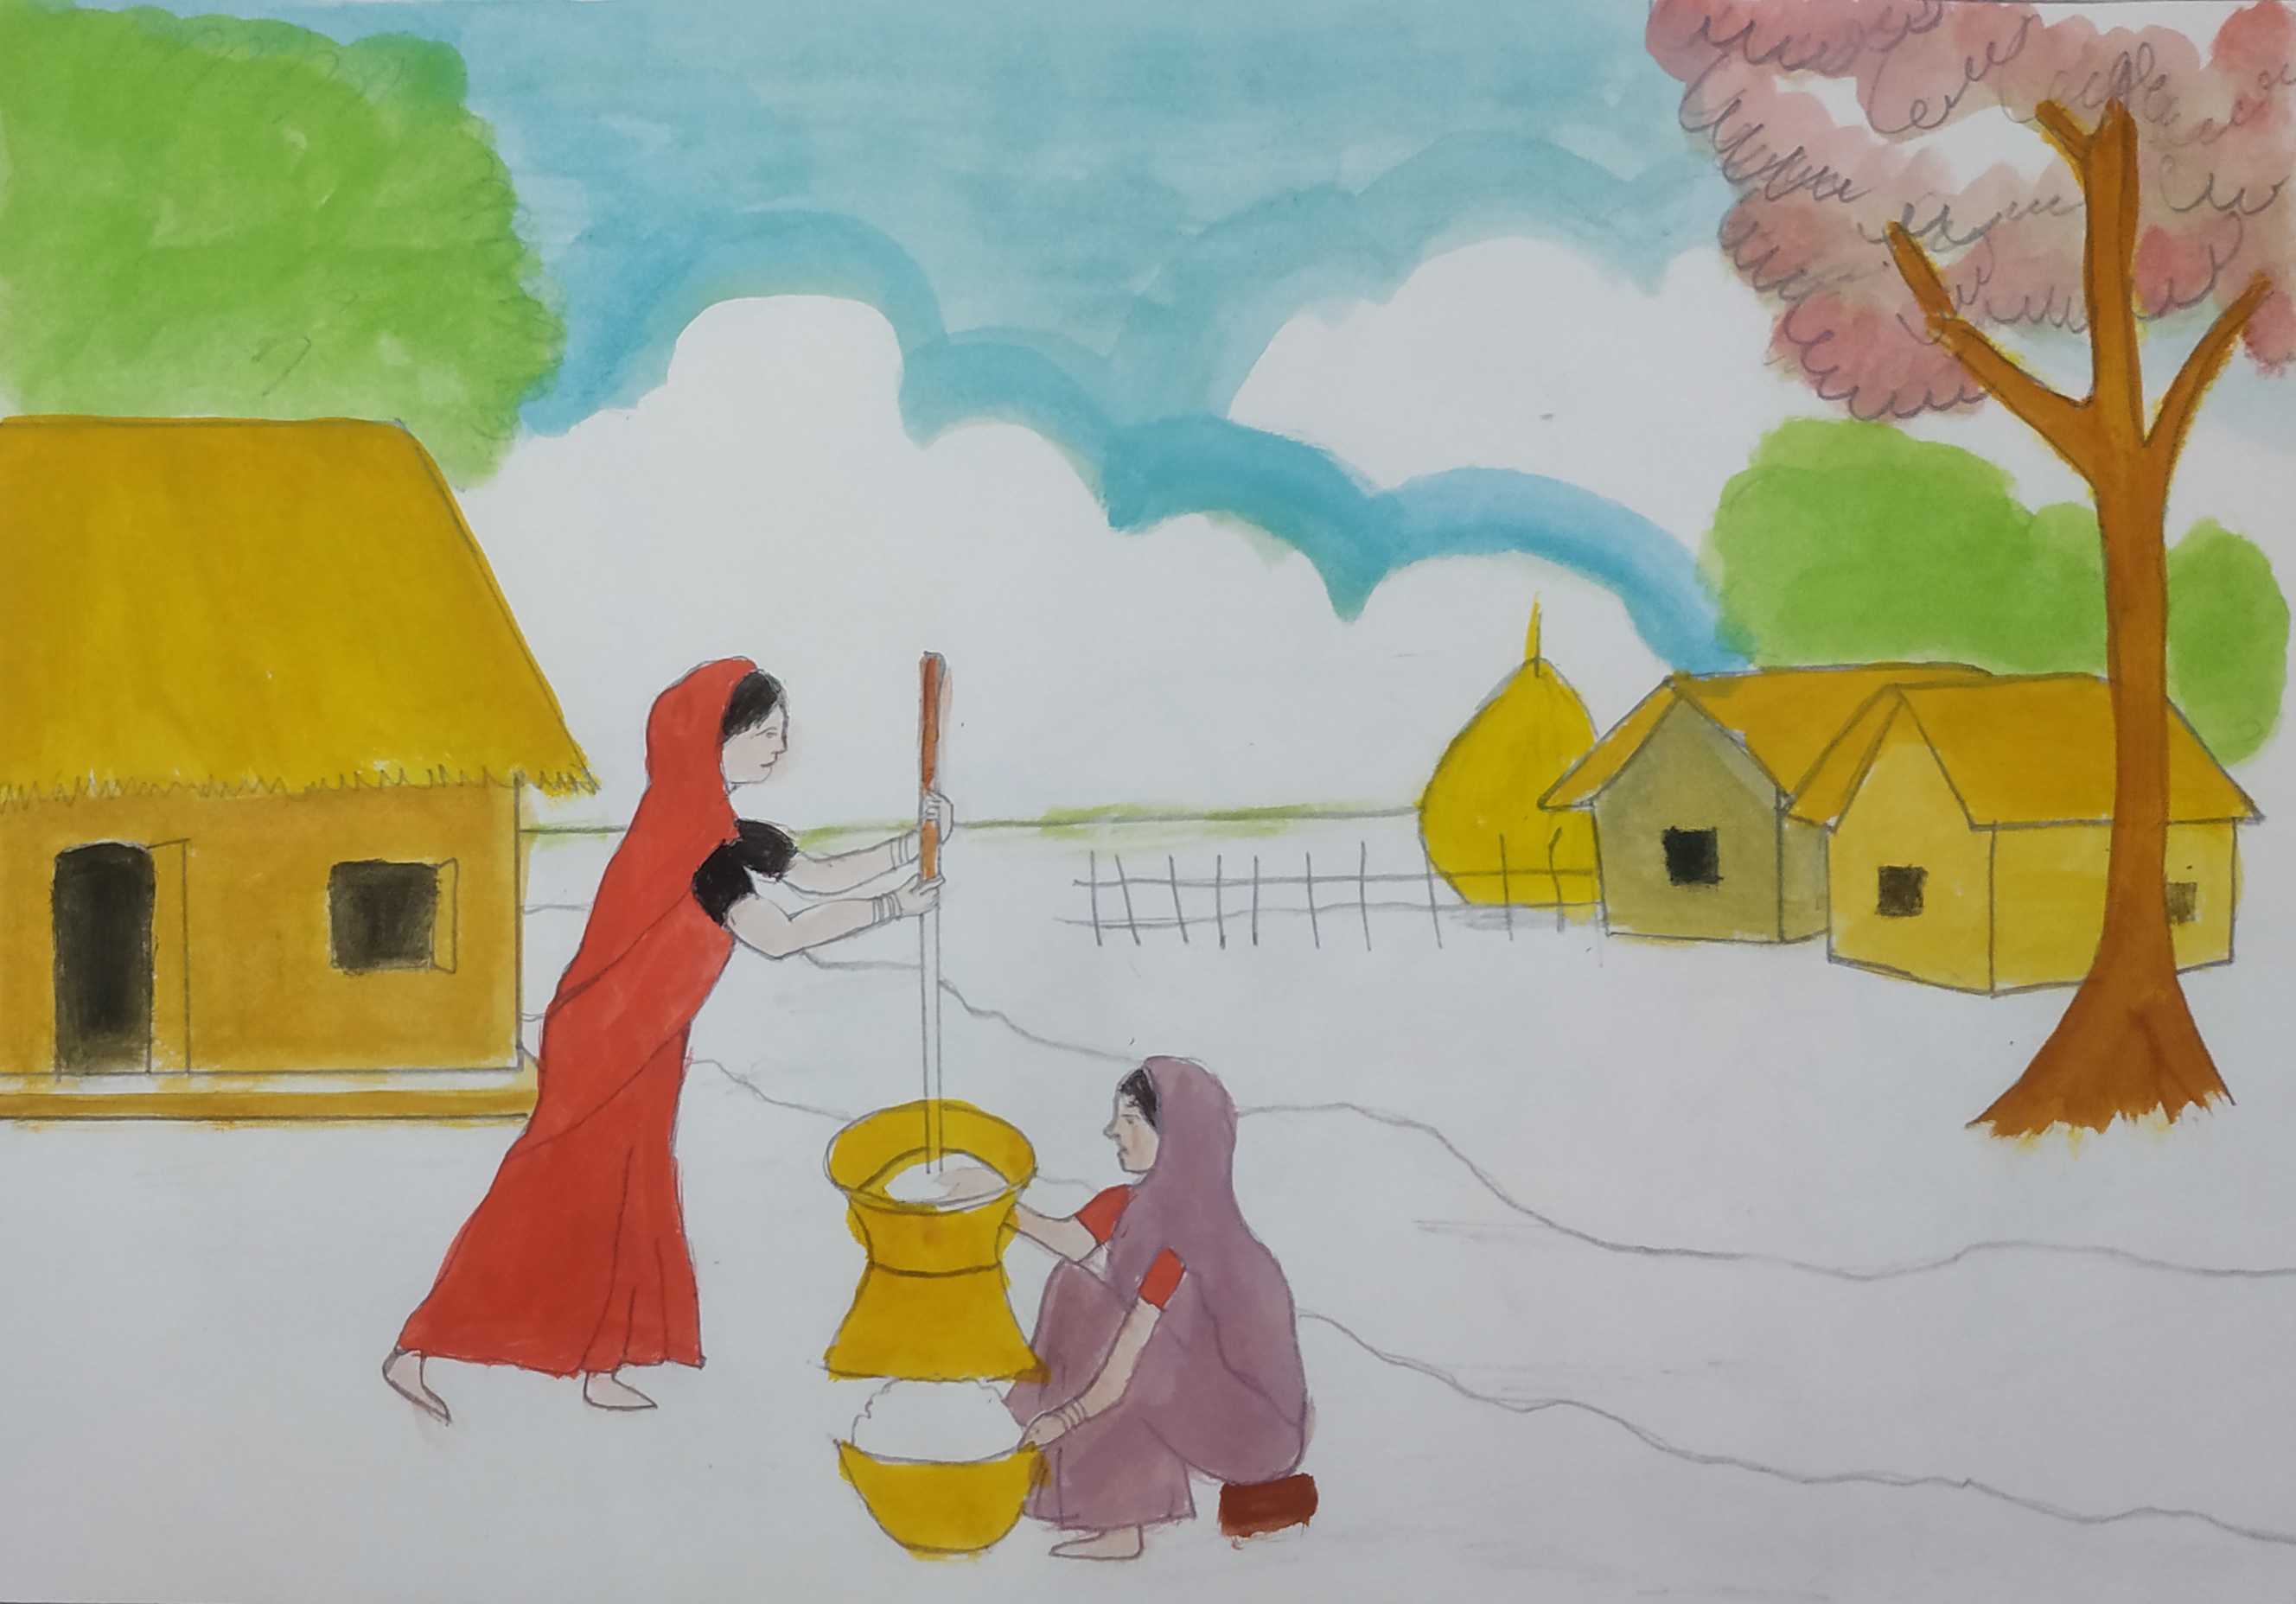 How to Draw a Village Scenery Step by Step | Scenery Drawing With Pencil  color | গ্রামের দৃশ্য অঙ্কন | Drawings, Colorful drawings, Human figure  sketches